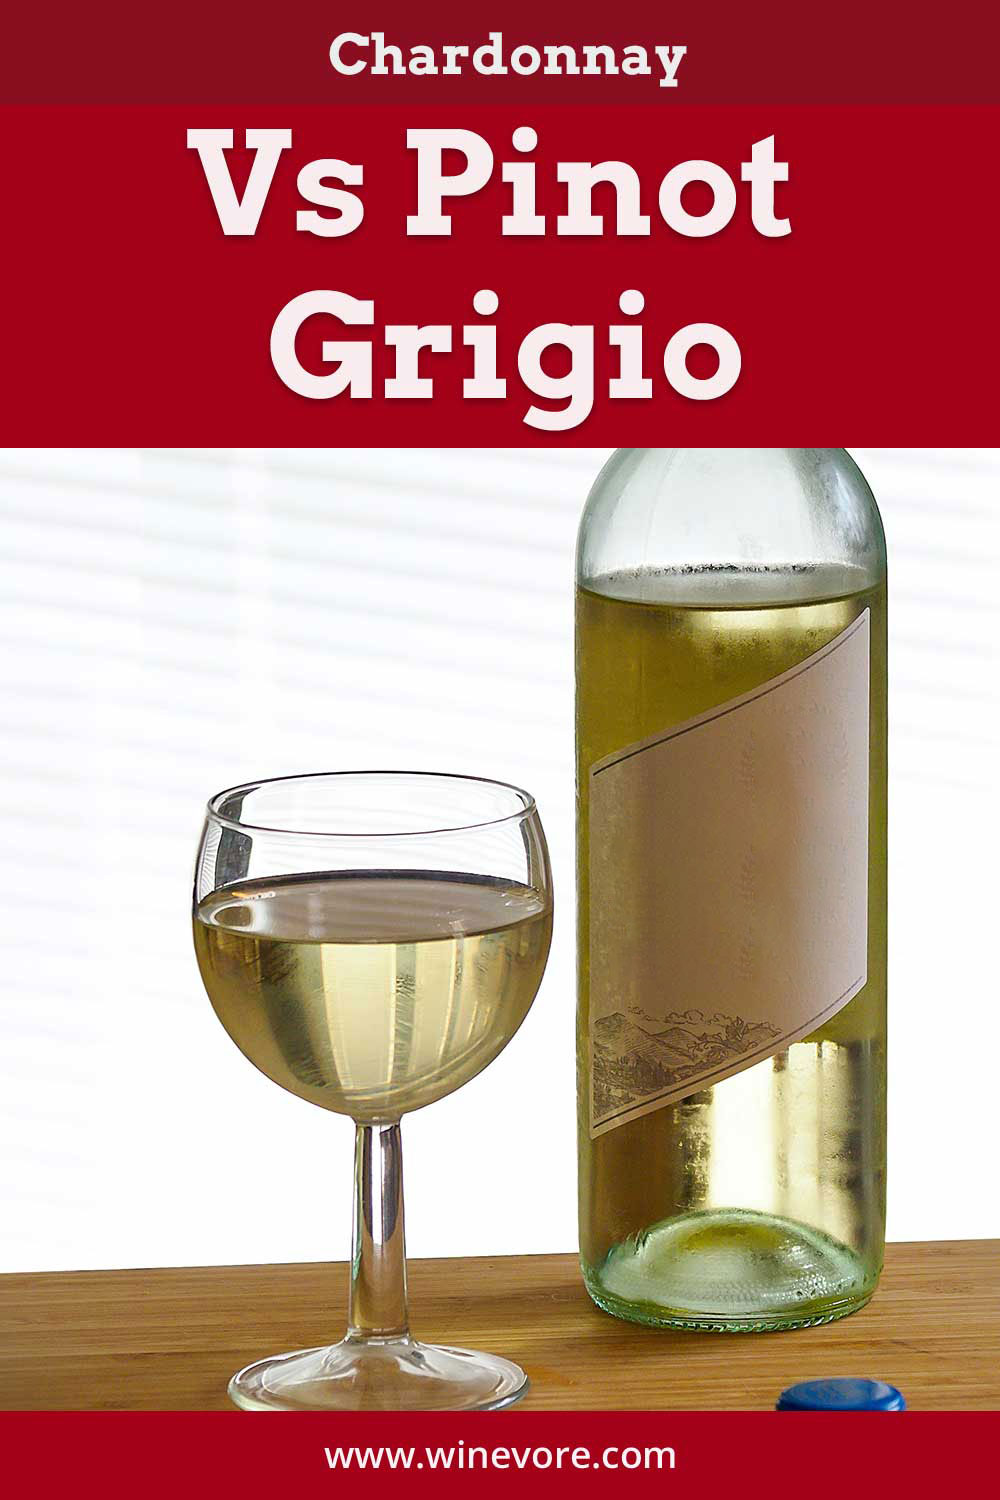 White wine bottle with a glass on a wooden surface - Chardonnay Vs Pinot Grigio